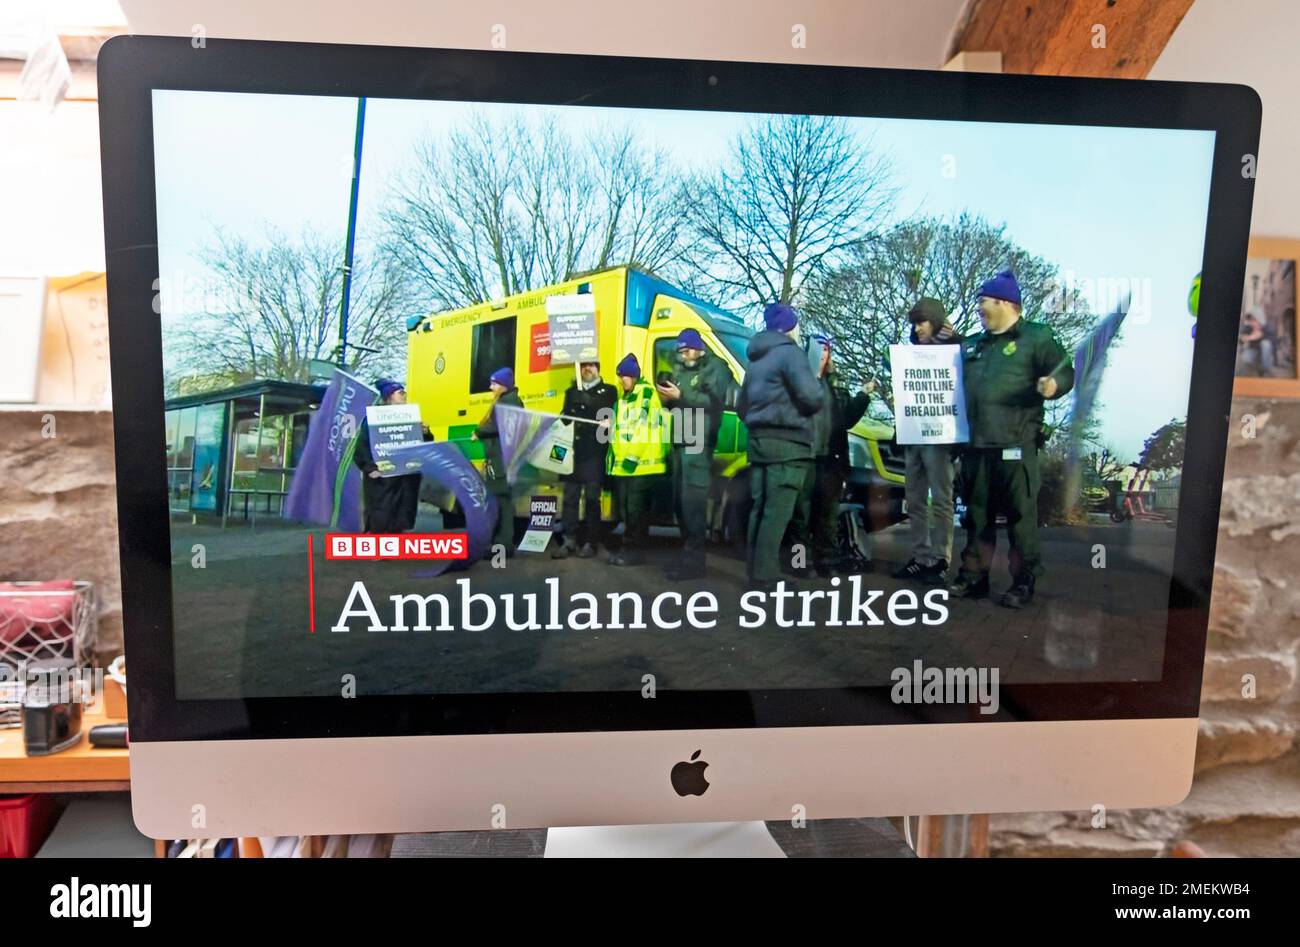 NHS ambulance strikes on BBC News programme computer screen in home Great Britain UK 24 January 2023 Stock Photo